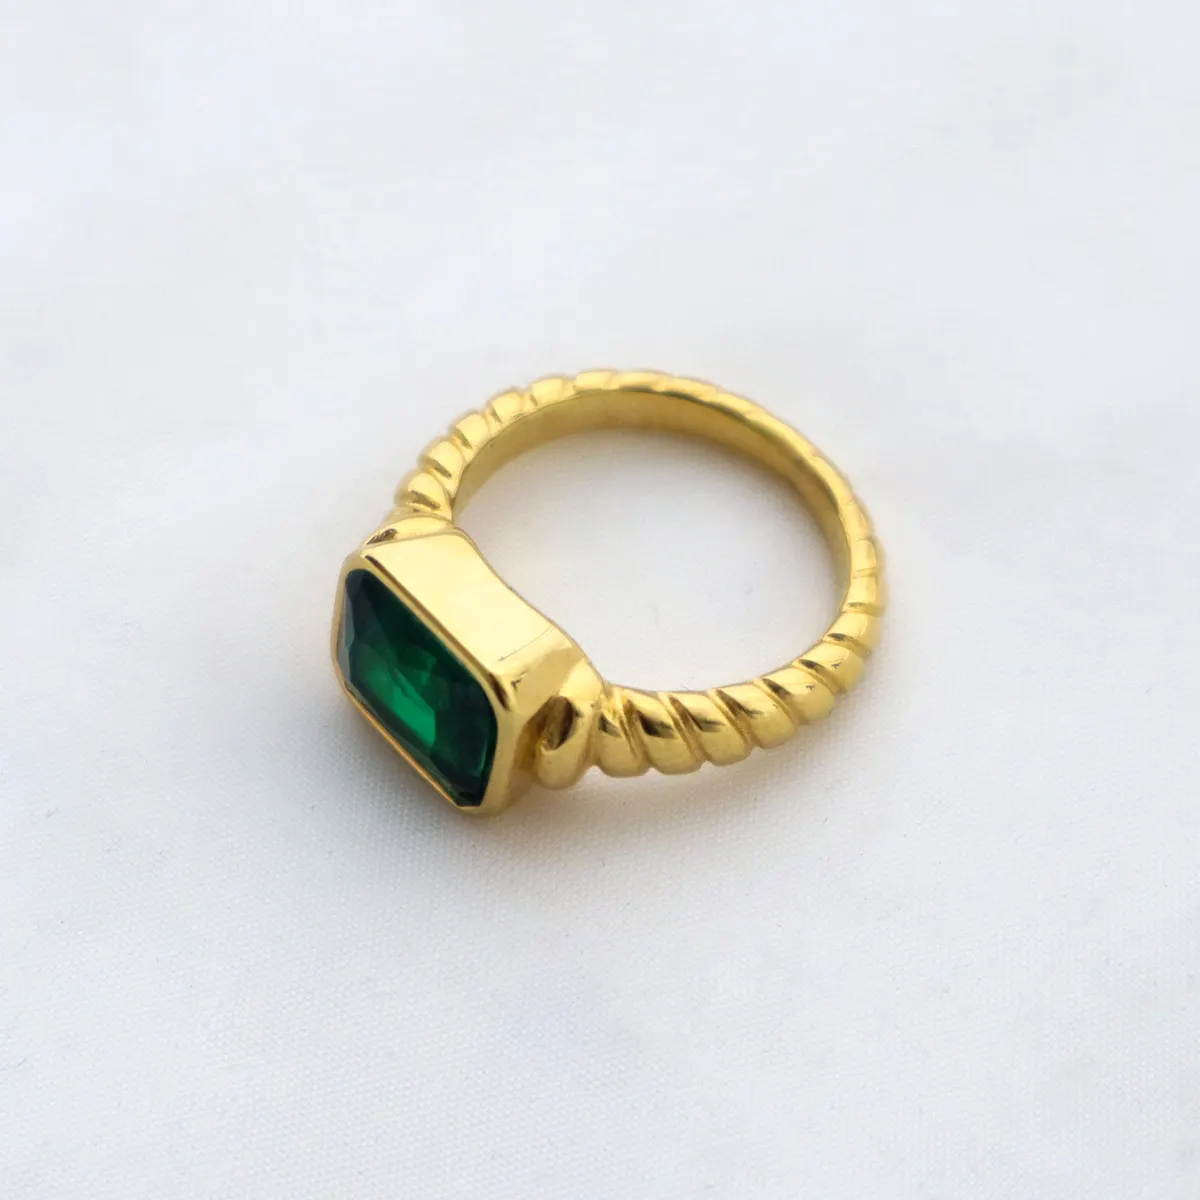 Ladies 18k Gold Plated Stainless Steel Croissant Wedding Rings Jewelry Women Green Emerald Cubic Zirconia Birthstone Ring